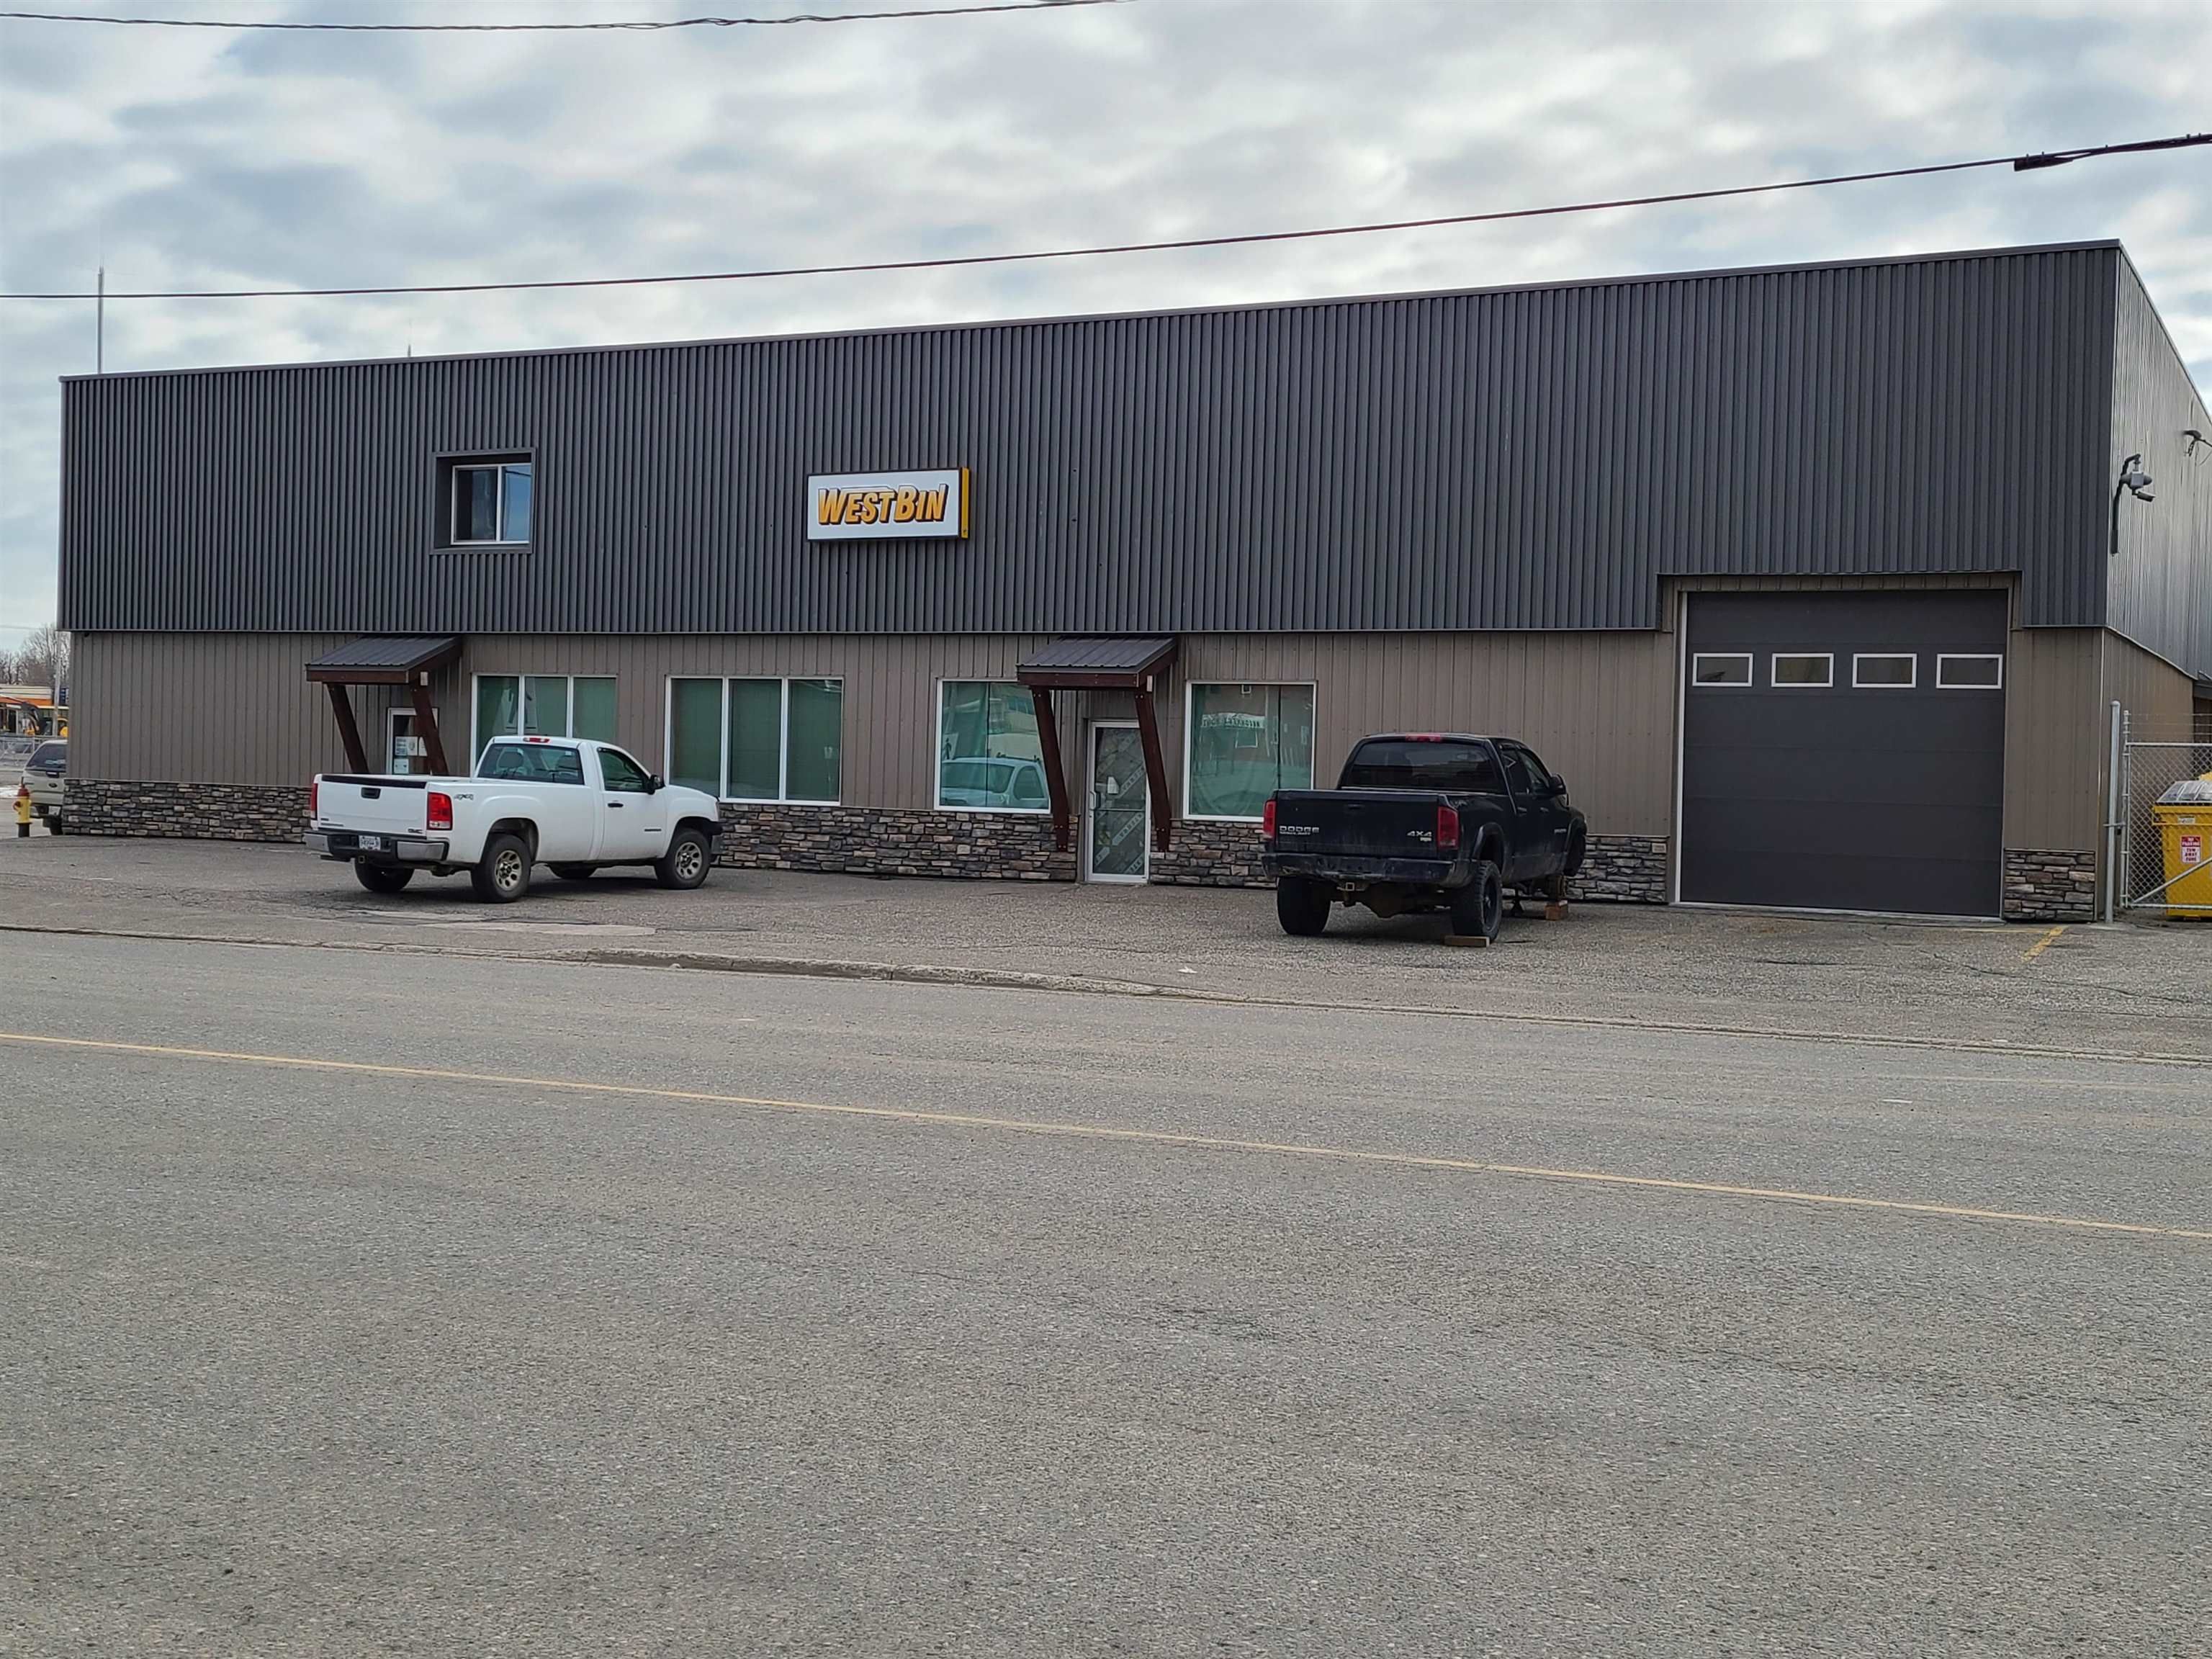 Main Photo: 220 QUEENSWAY Avenue in Prince George: East End Industrial for lease (PG City Central)  : MLS®# C8047220